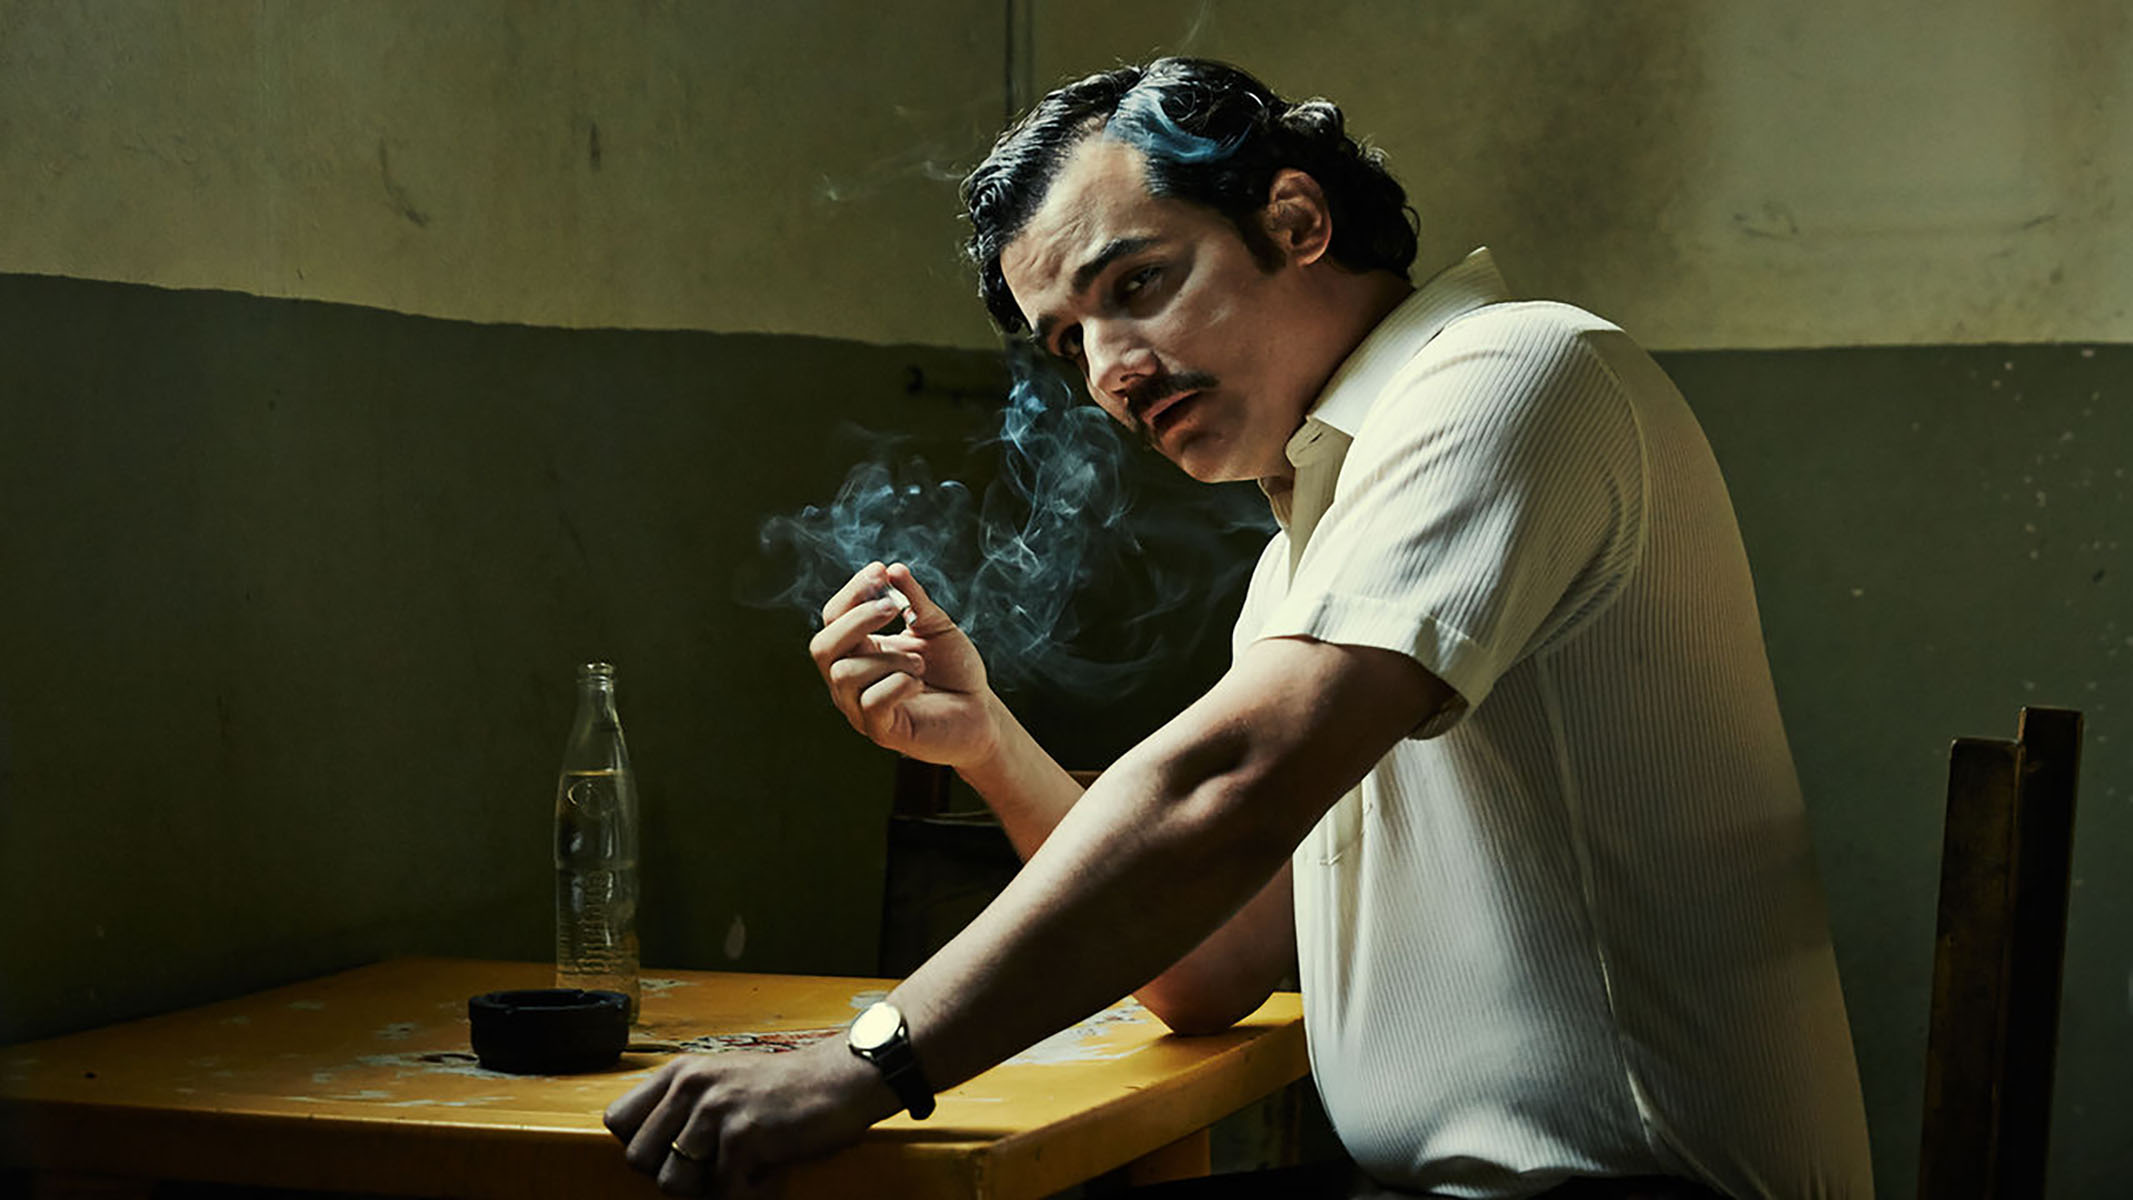 Pablo Escobar (Wagner Moura) smokes a cigarette. Photo courtesy of https://scdn.nflximg.net/images/9834/21939834.jpg.